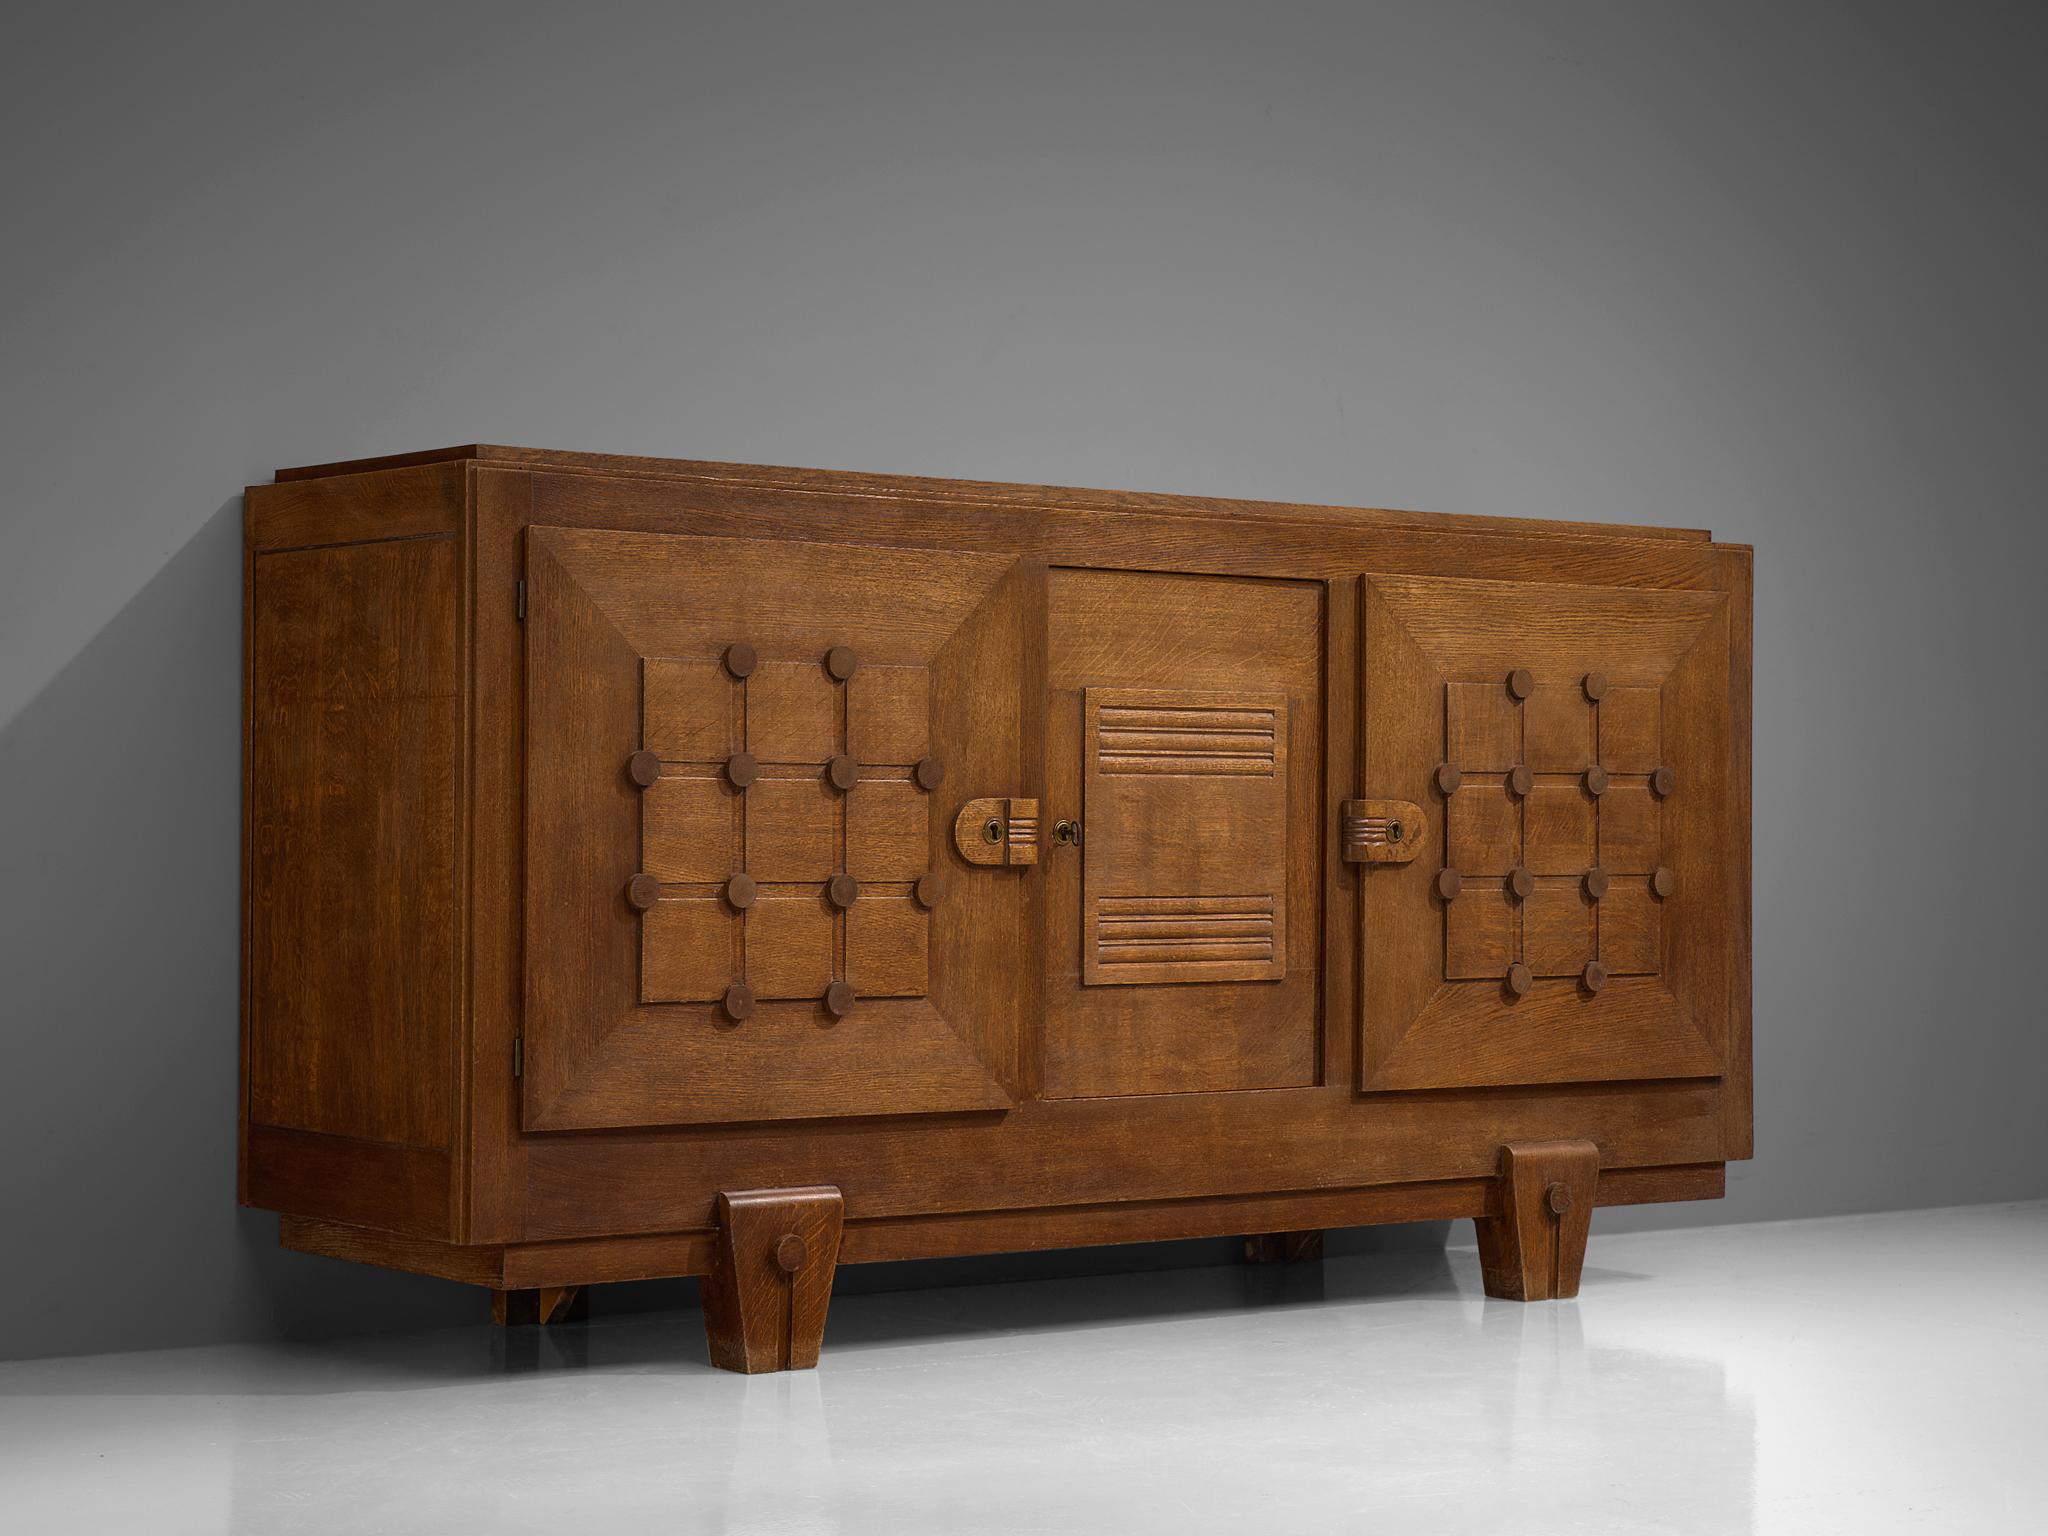 French Art Deco Credenza in Oak with Graphical Details (Art déco)